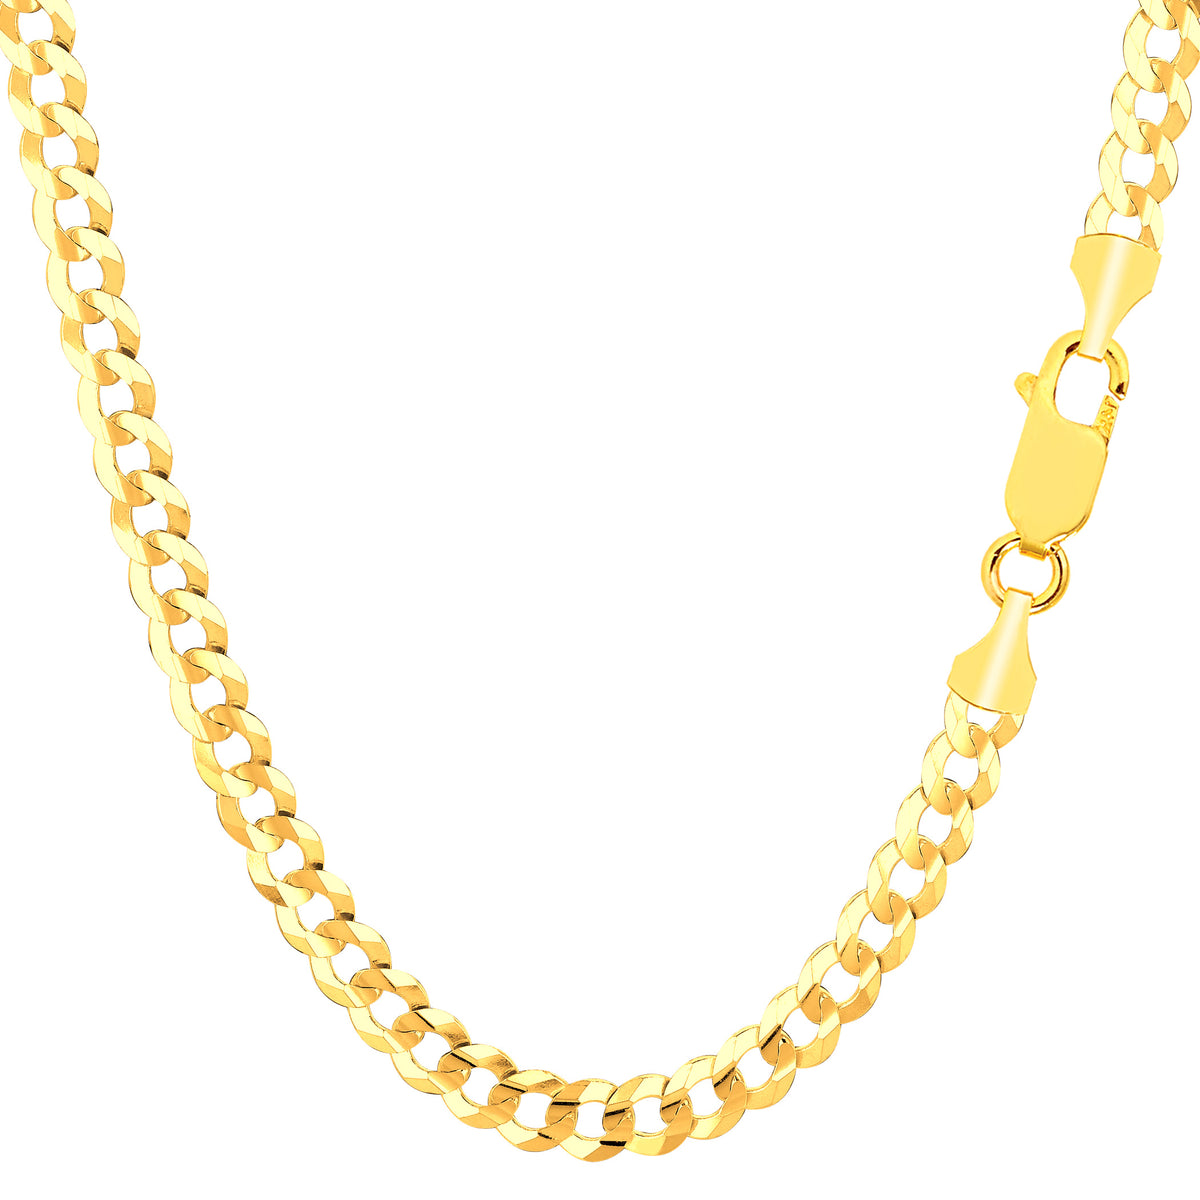 14k Yellow Solid Gold Comfort Curb Chain Bracelet, 4.7mm, 8.5" fine designer jewelry for men and women